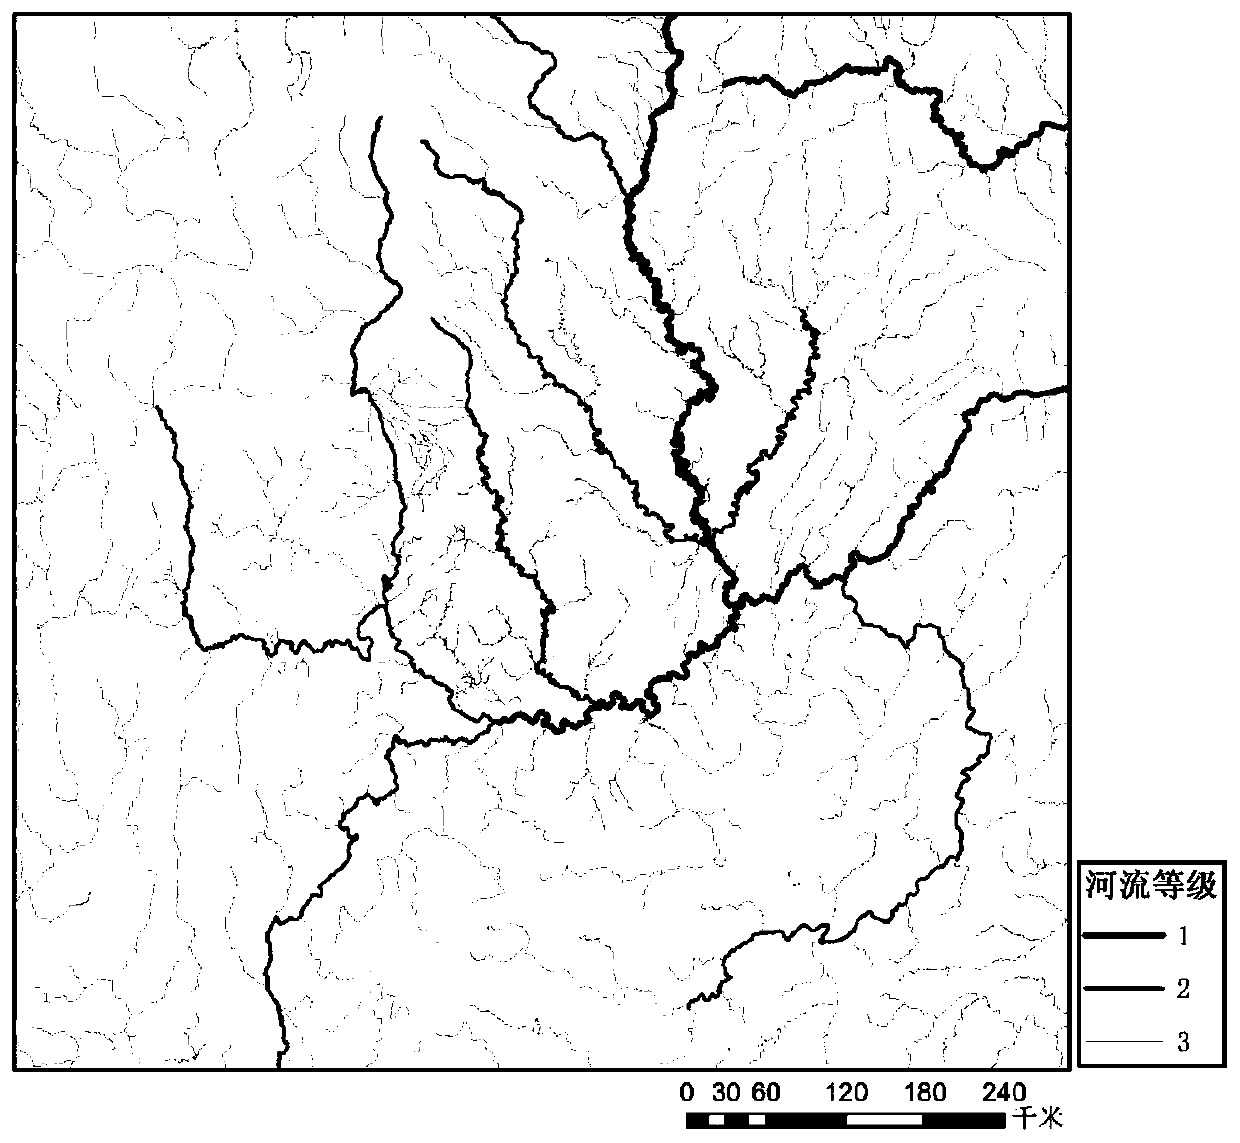 Automatic cartographic generalization method of canal linear river system element considering density variation